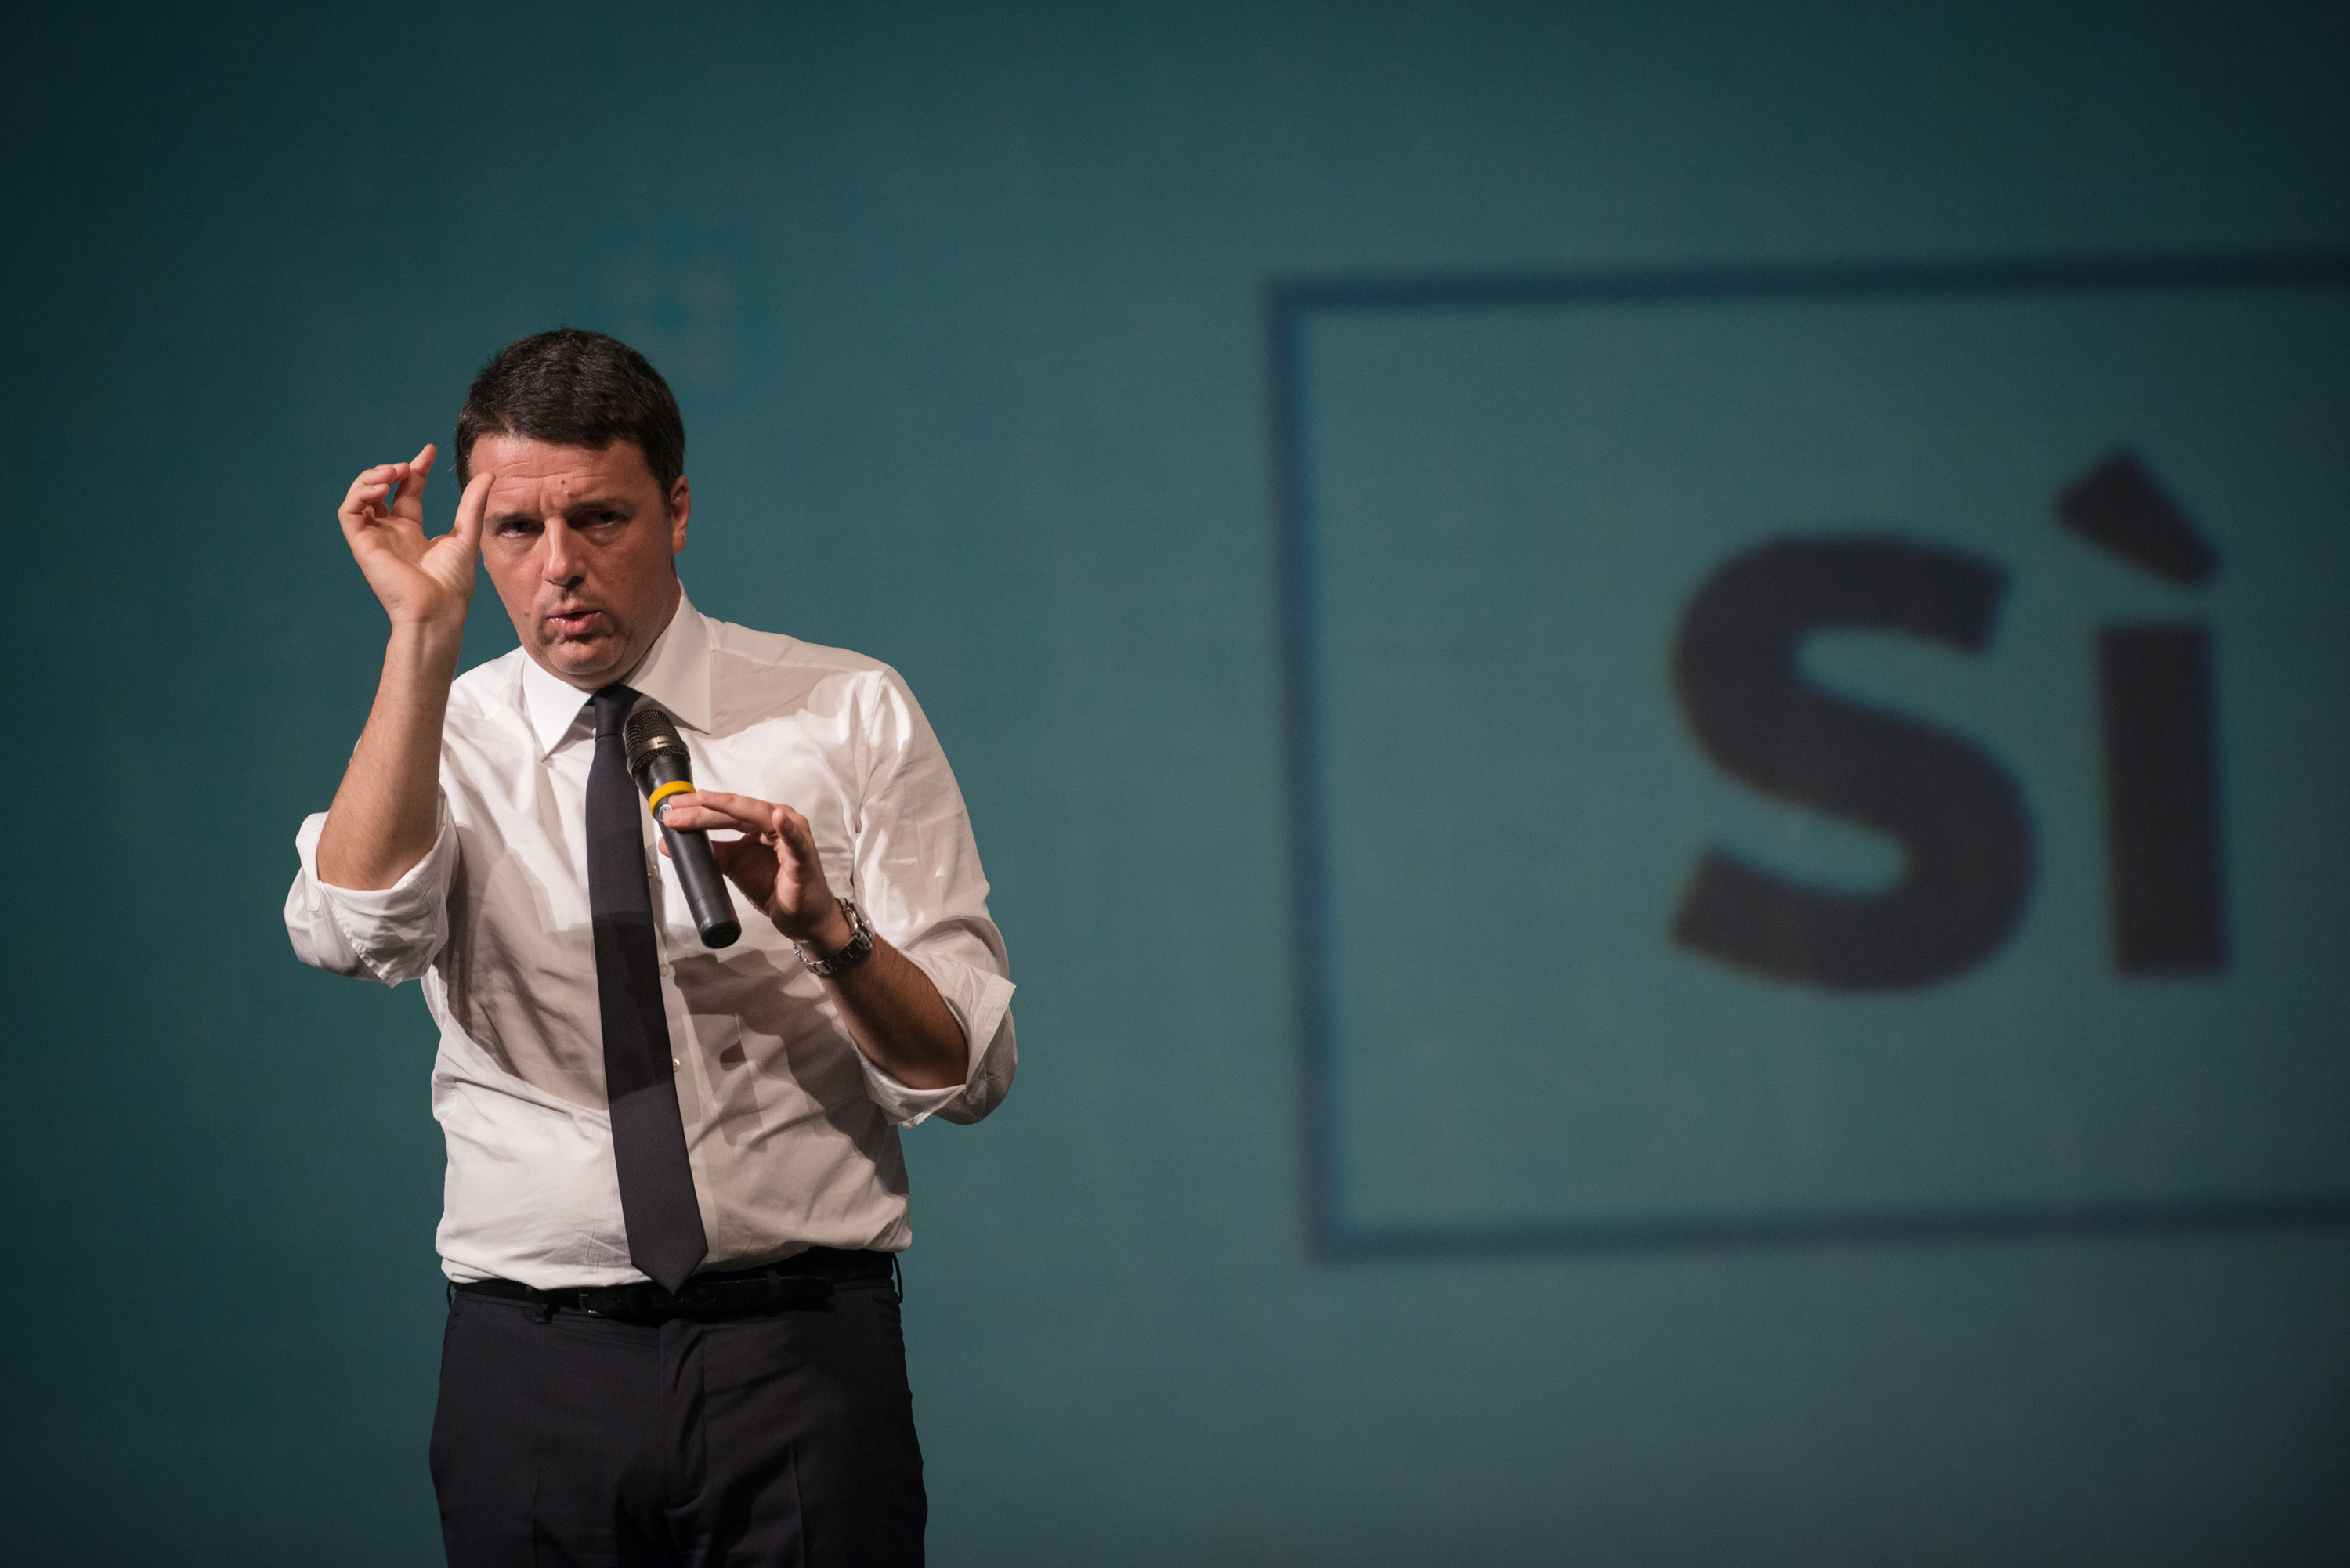 Italian Prime Minister Renzi during a Pro Yes conference for